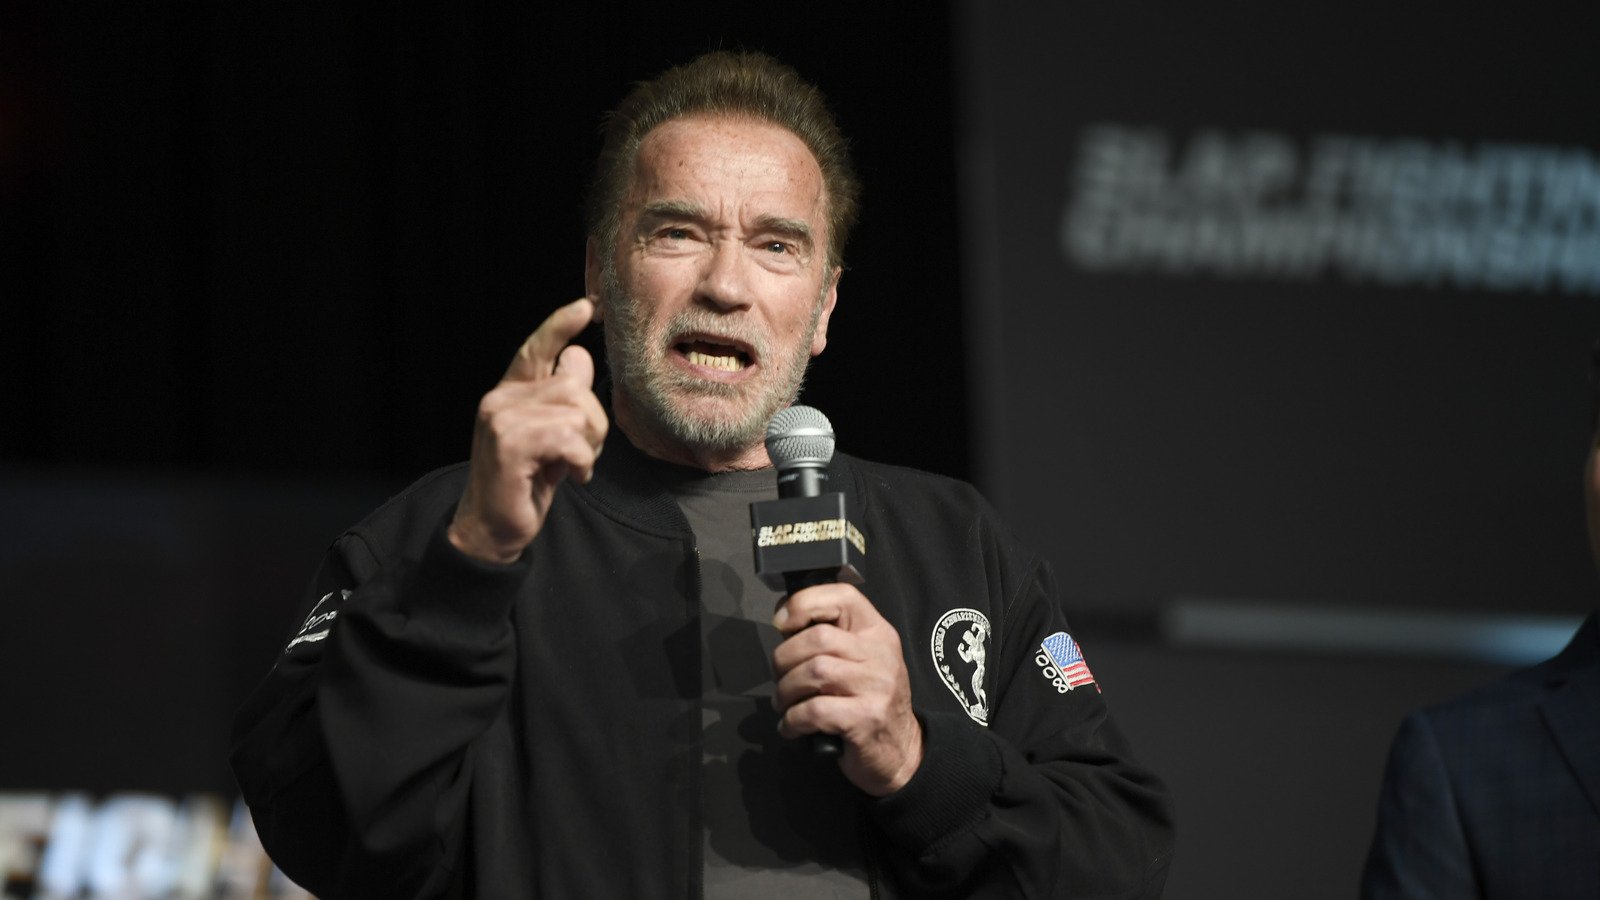 The Top 5 Most Expensive Vehicles Owned By Arnold Schwarzenegger